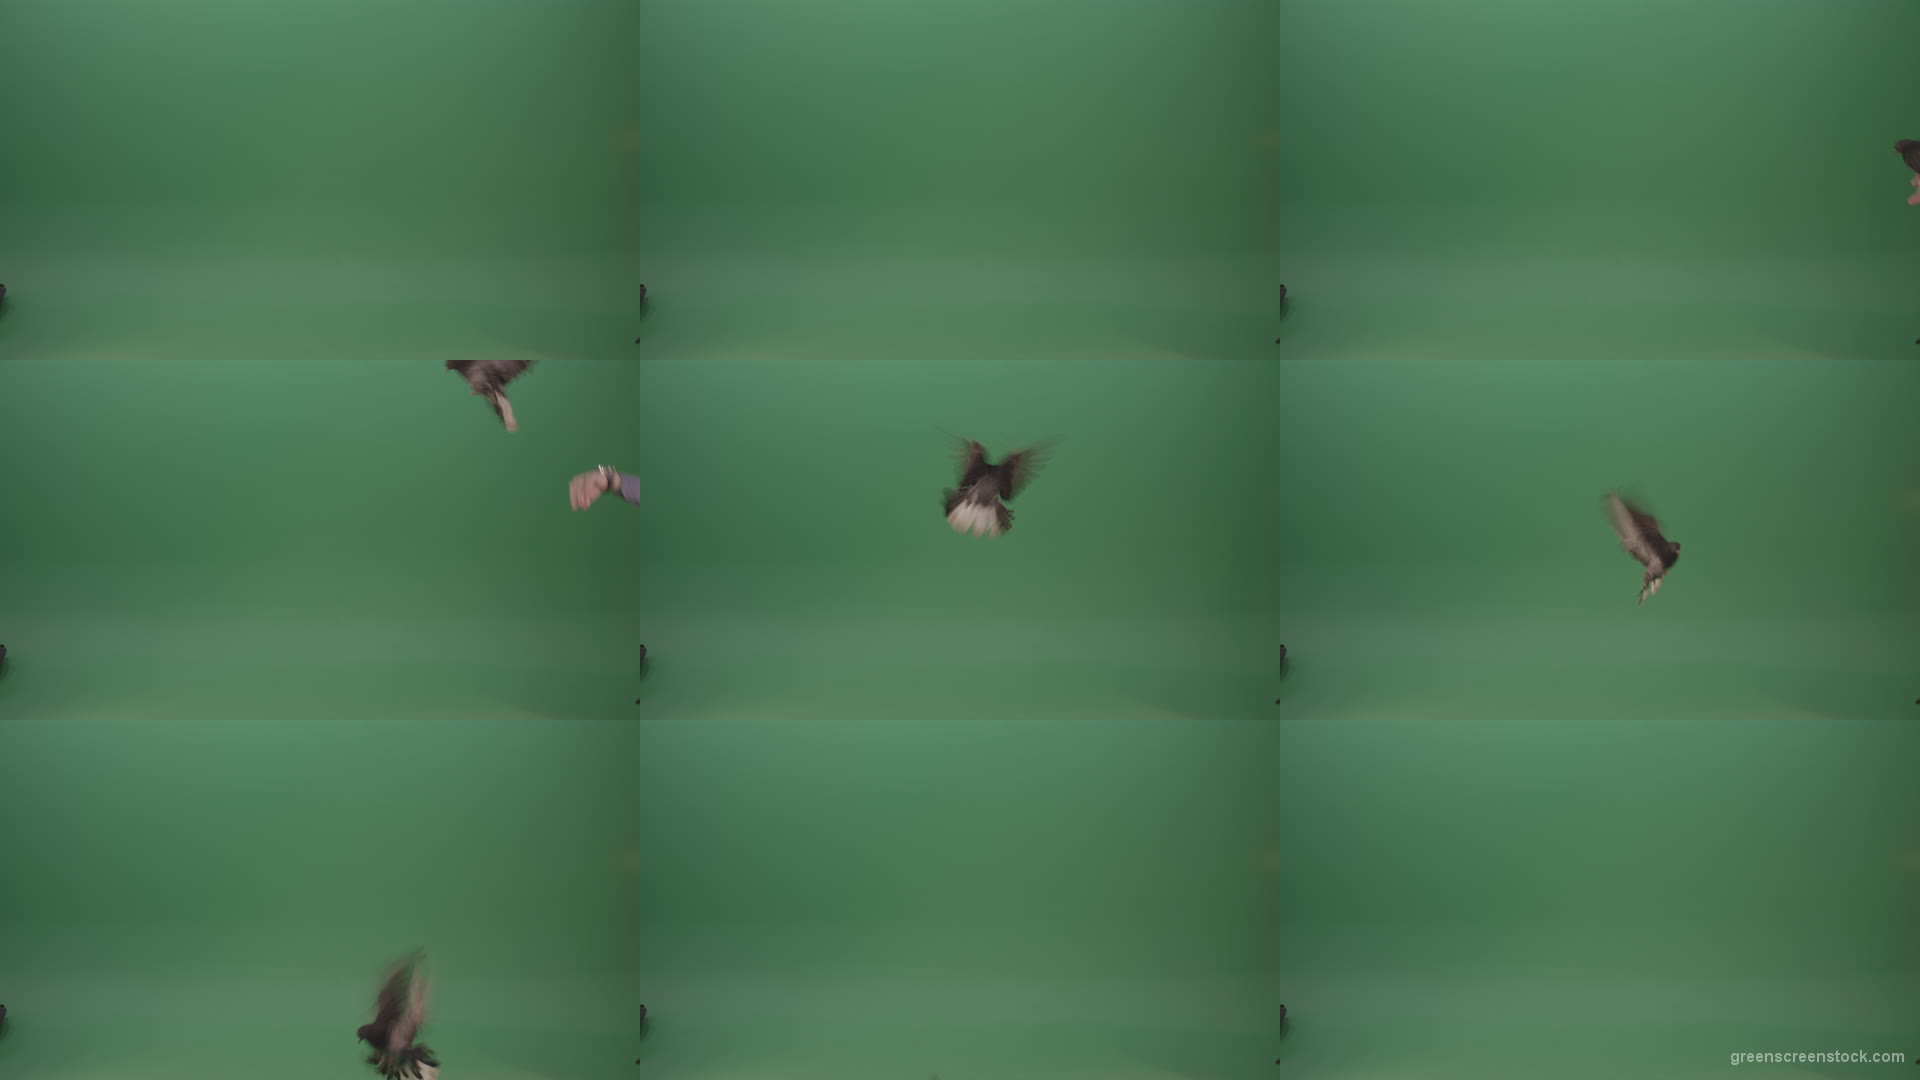 Raft-of-a-gray-pigeon-in-a-circle-of-landing-isolated-on-green-screen Green Screen Stock